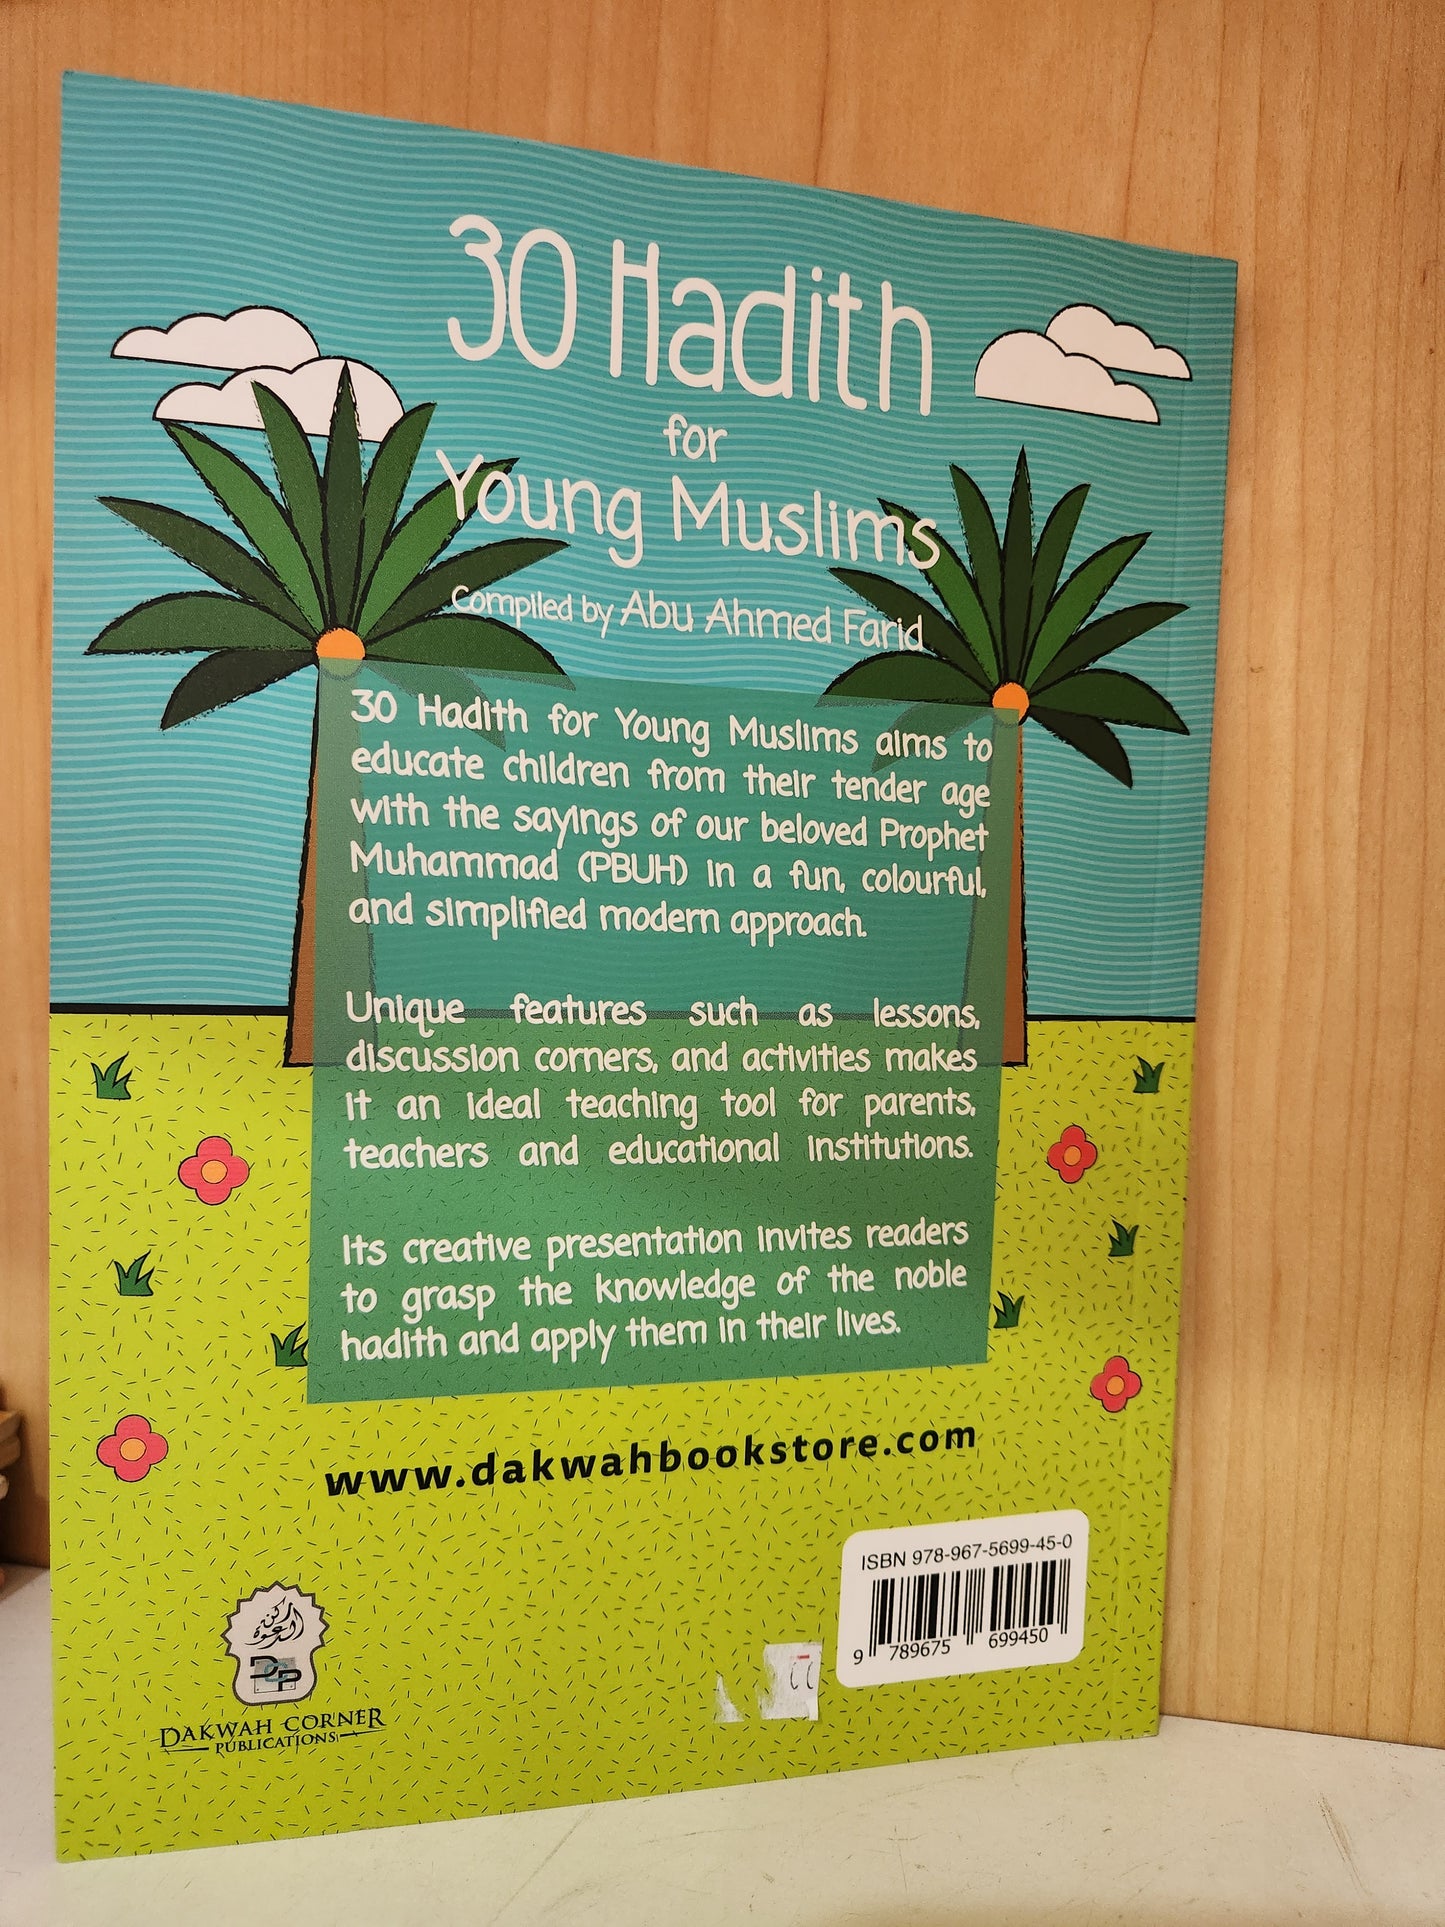 30 Hadith For Young Muslims by Abu Ahmed Farid